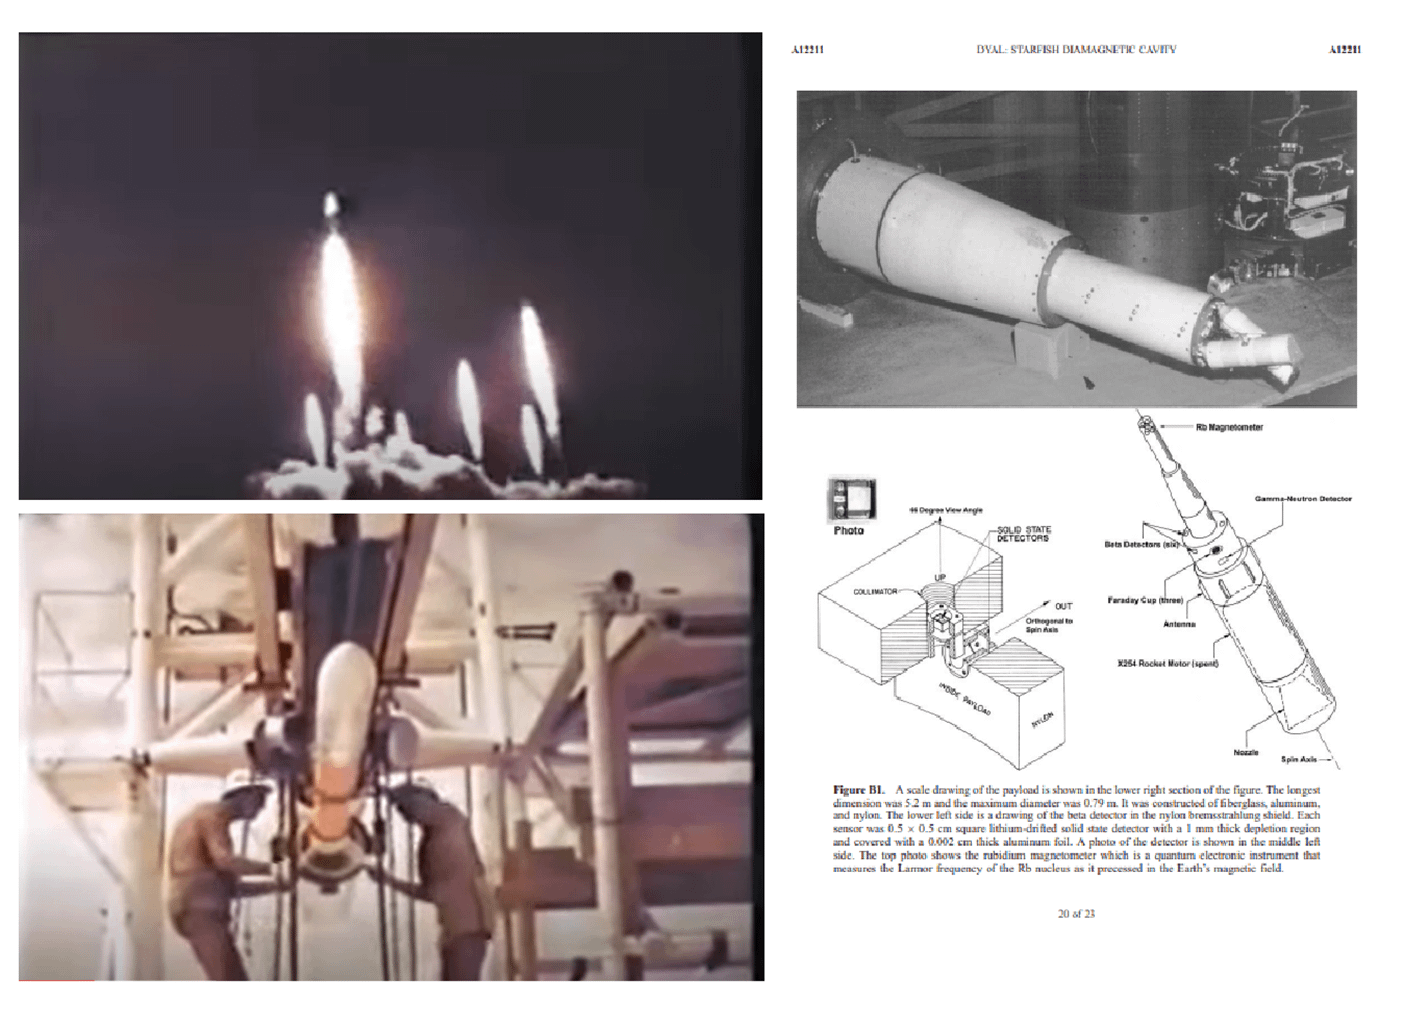 r/UFOB - Two-stage instrumented rocket used for Blue Gill Triple Prime shot (left) compared with multi-stage Scout vehicle used for the Starfish Prime shot.